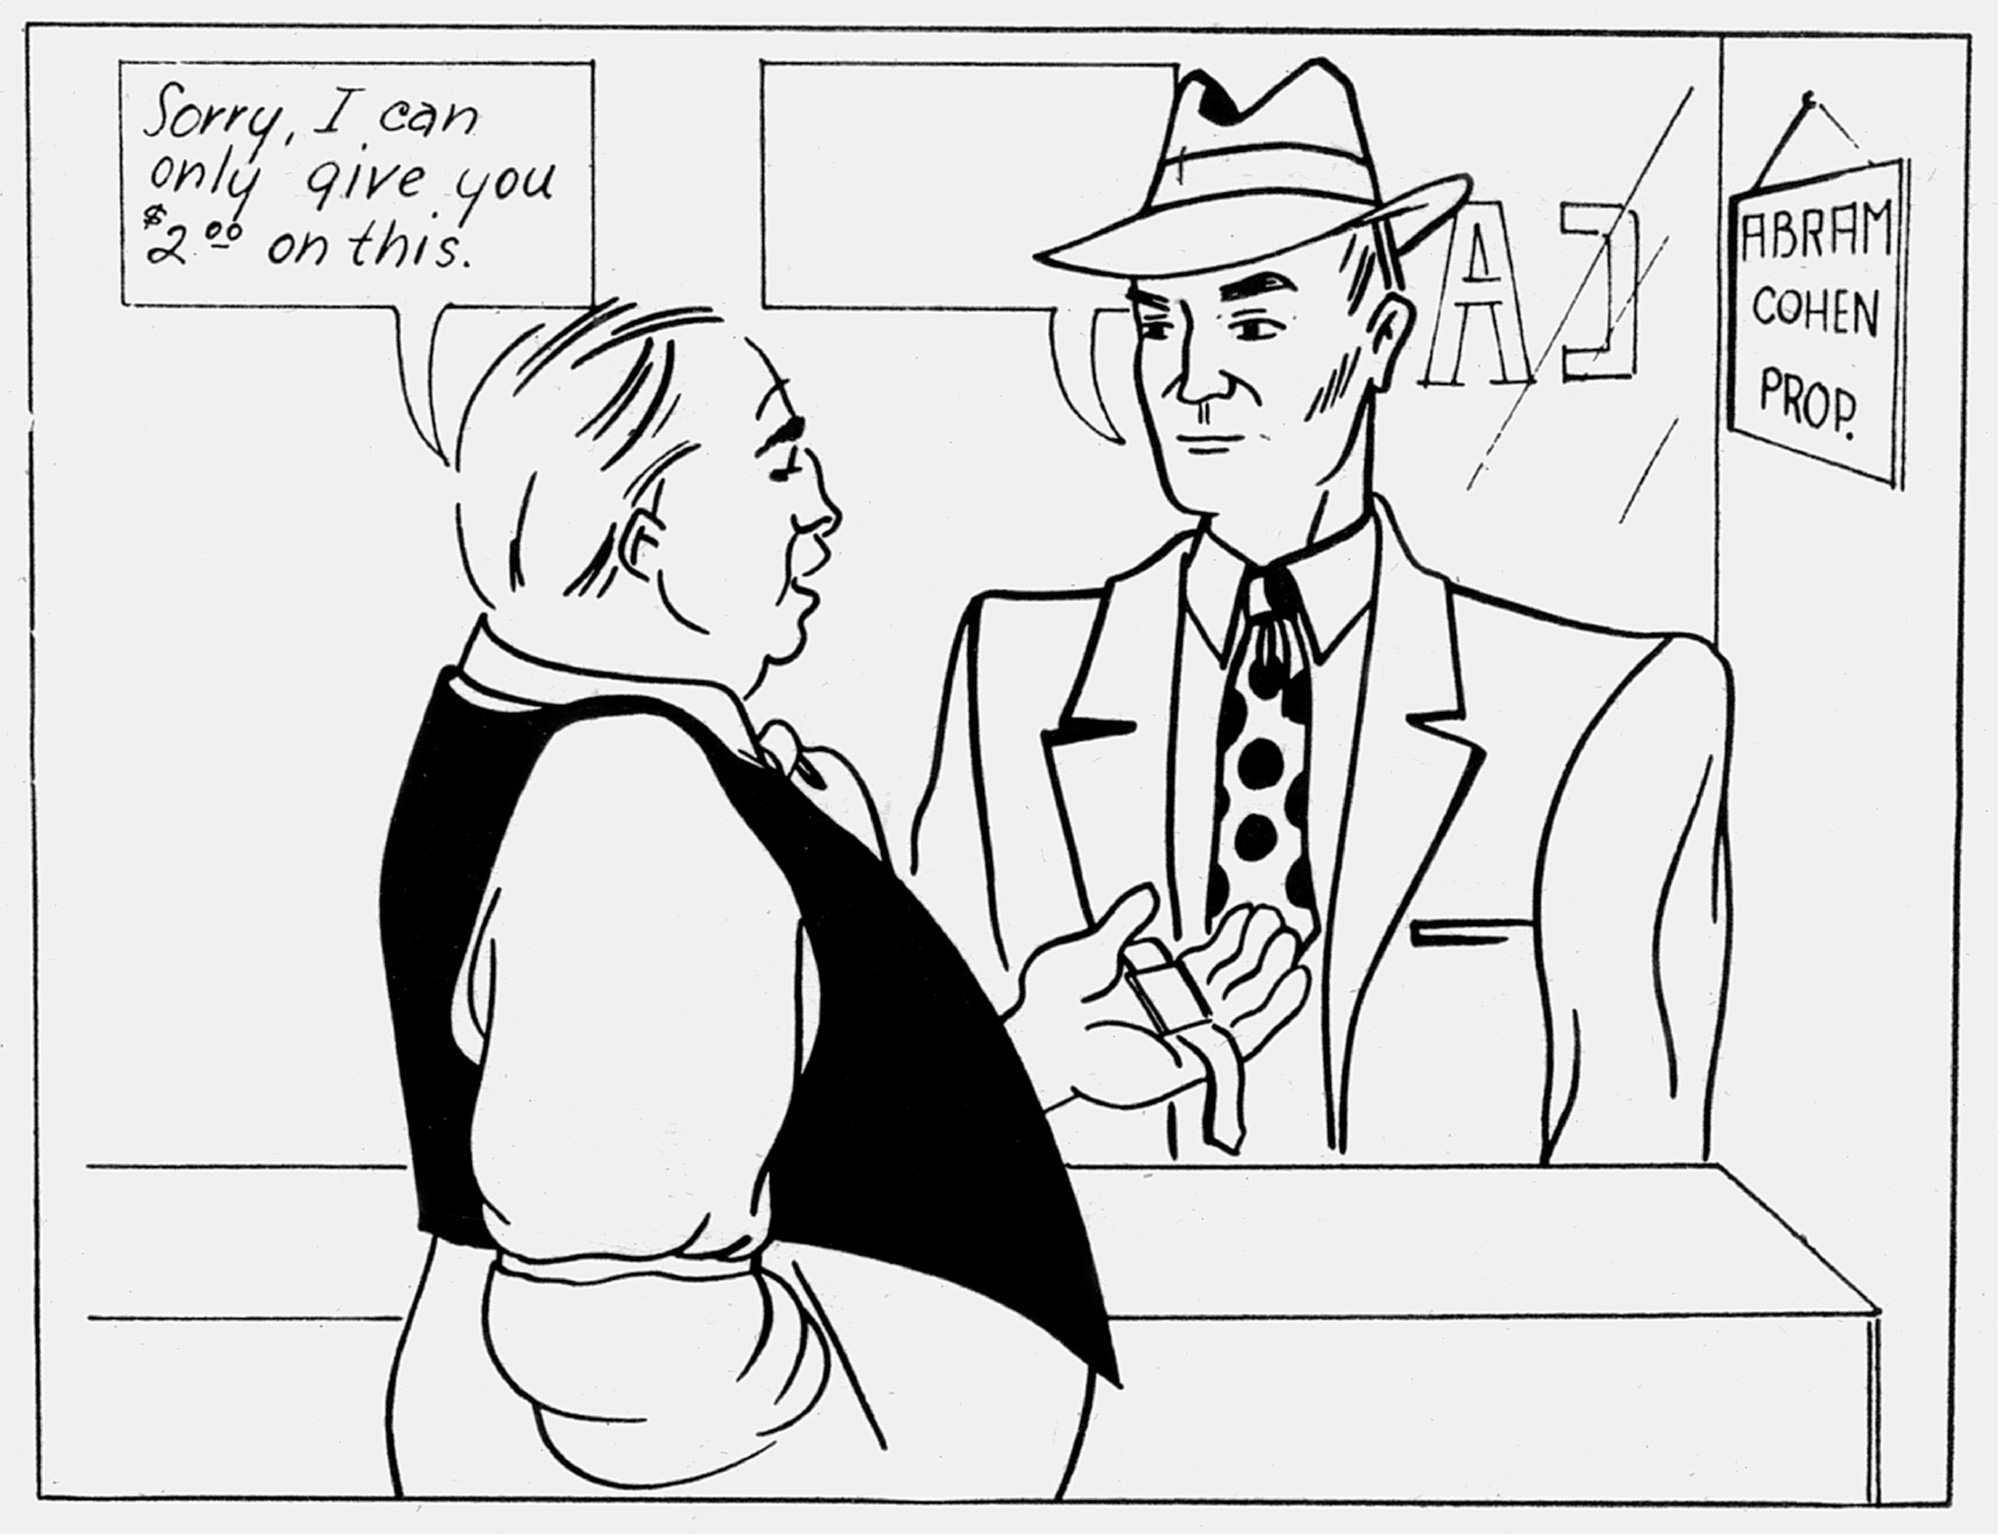 A cartoon from the Rosenzweig Picture-Frustration Study. The cartoon features a man behind the counter at a pawn shop holding a watch and telling a customer “I can only give you two $2.00 on this.” The customer has a blank speech bubble emerging from his face. 